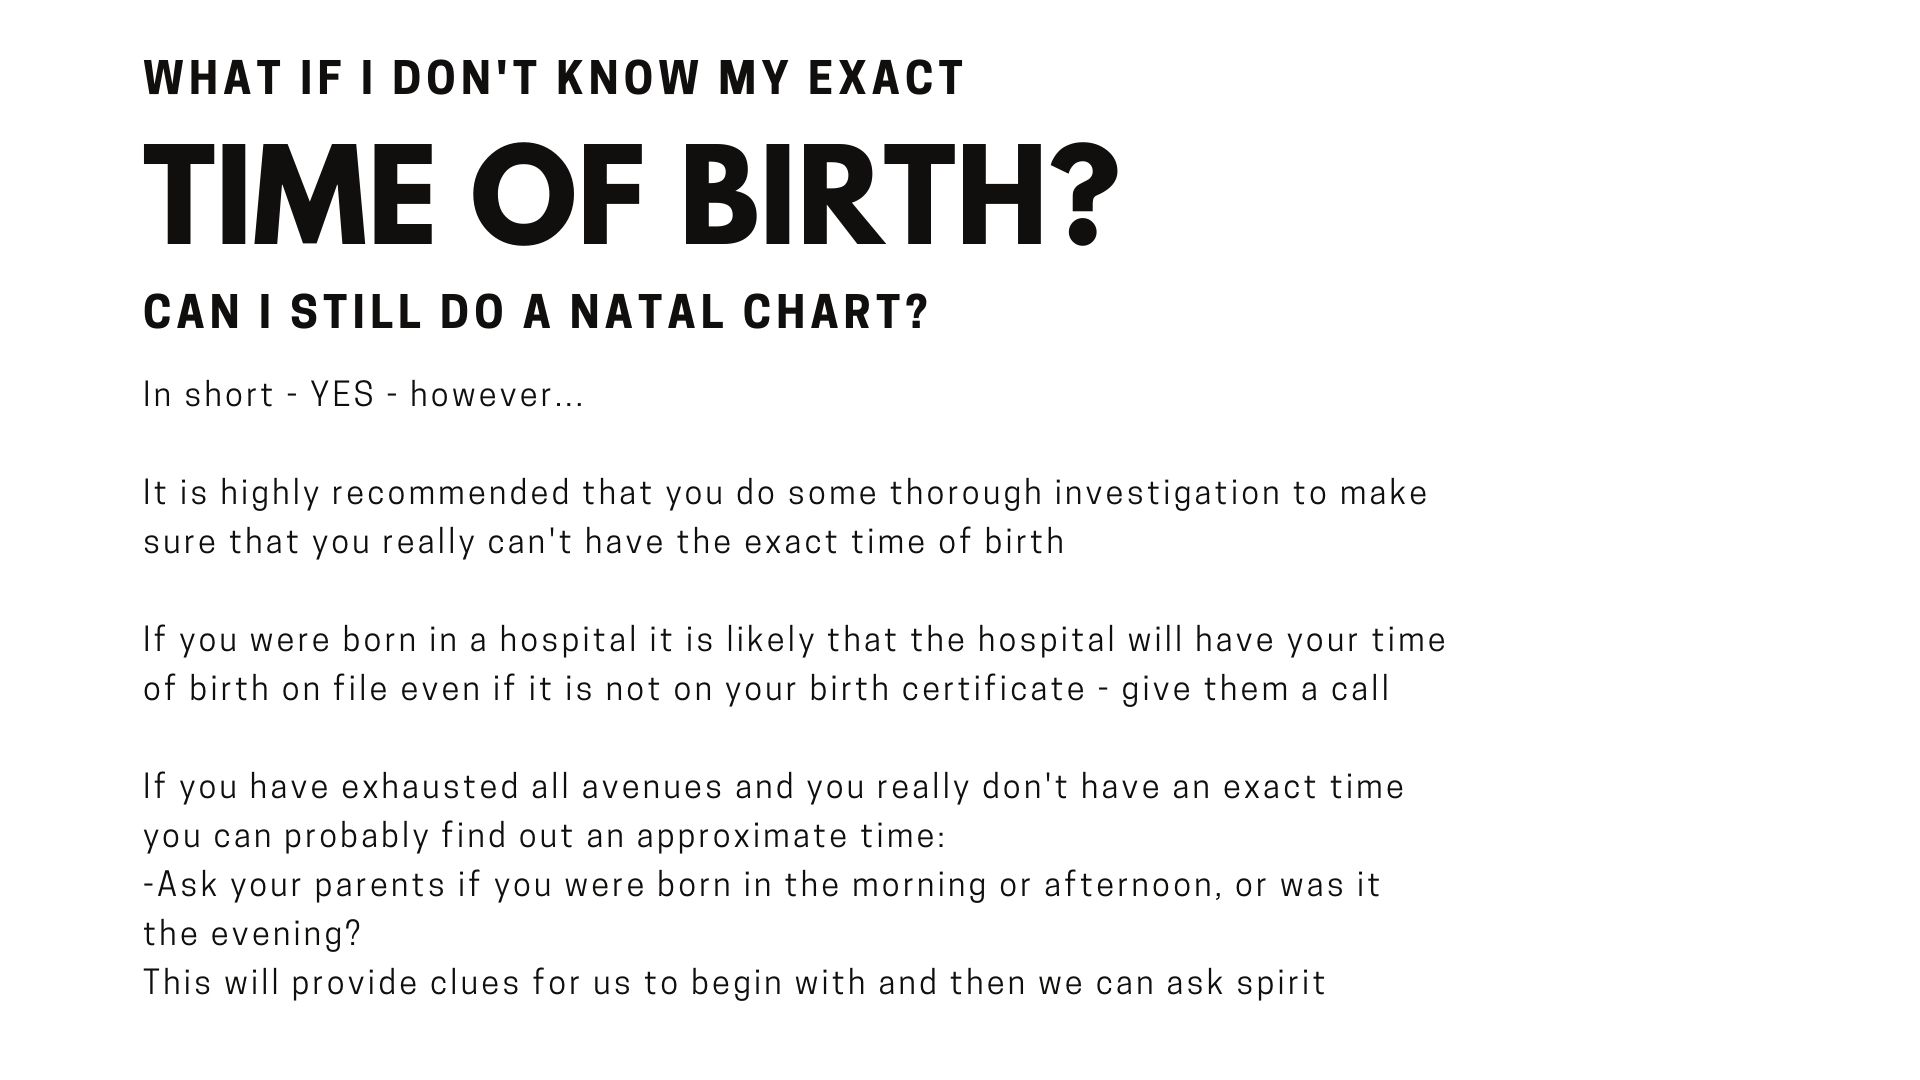 Astrology Natal chart Question with Psychic Carla LunAscention - What if I dont know my time of birth?  Can I still do a natal chart? In short - YES - however...  It is highly recommended that you do some thorough investigation to make sure that you really can't have the exact time of birth  If you were born in a hospital it is likely that the hospital will have your time of birth on file even if it is not on your birth certificate - give them a call  If you have exhausted all avenues and you really don't have an exact time you can probably find out an approximate time:  -Ask your parents if you were born in the morning or afternoon, or was it the evening? This will provide clues for us to begin with and then we can ask spirit